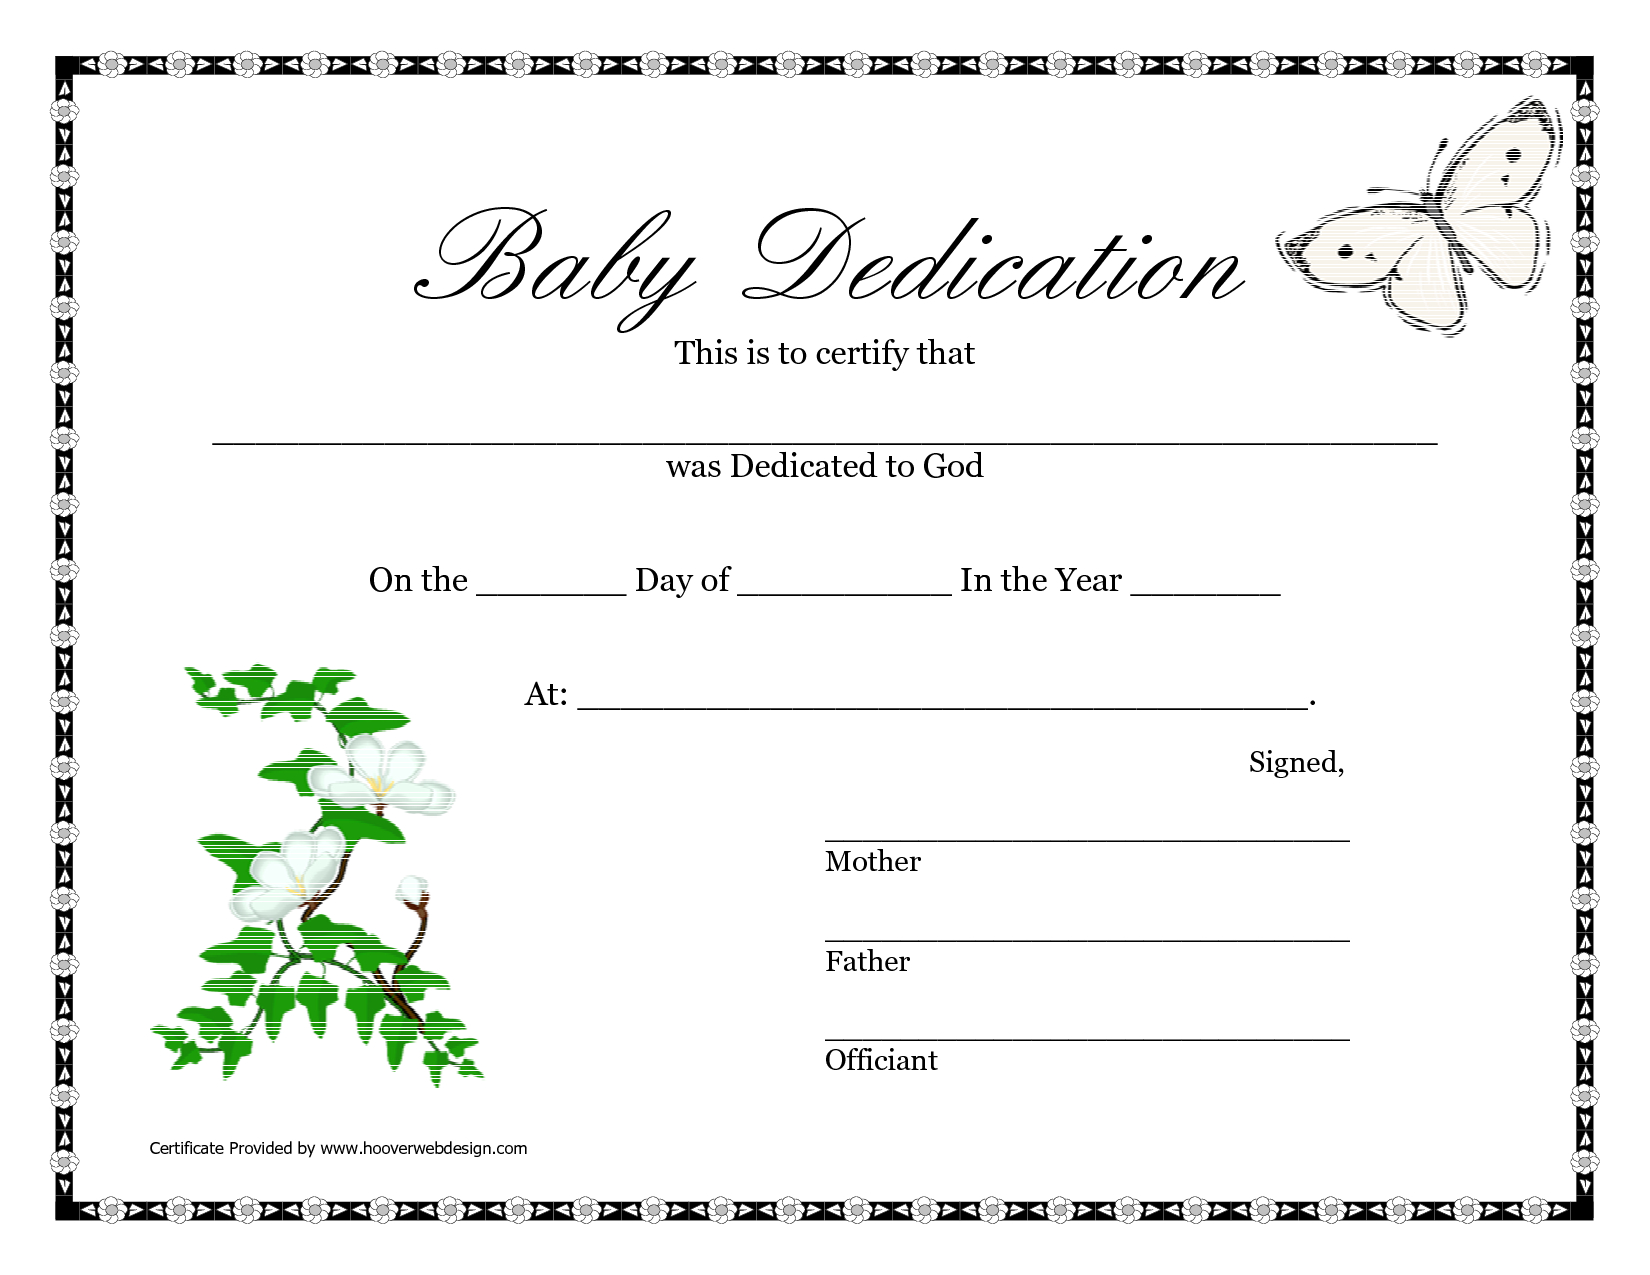 Certified Baby Name. Baby Dedication Certificate 6 Download In Baby Dedication Certificate Template